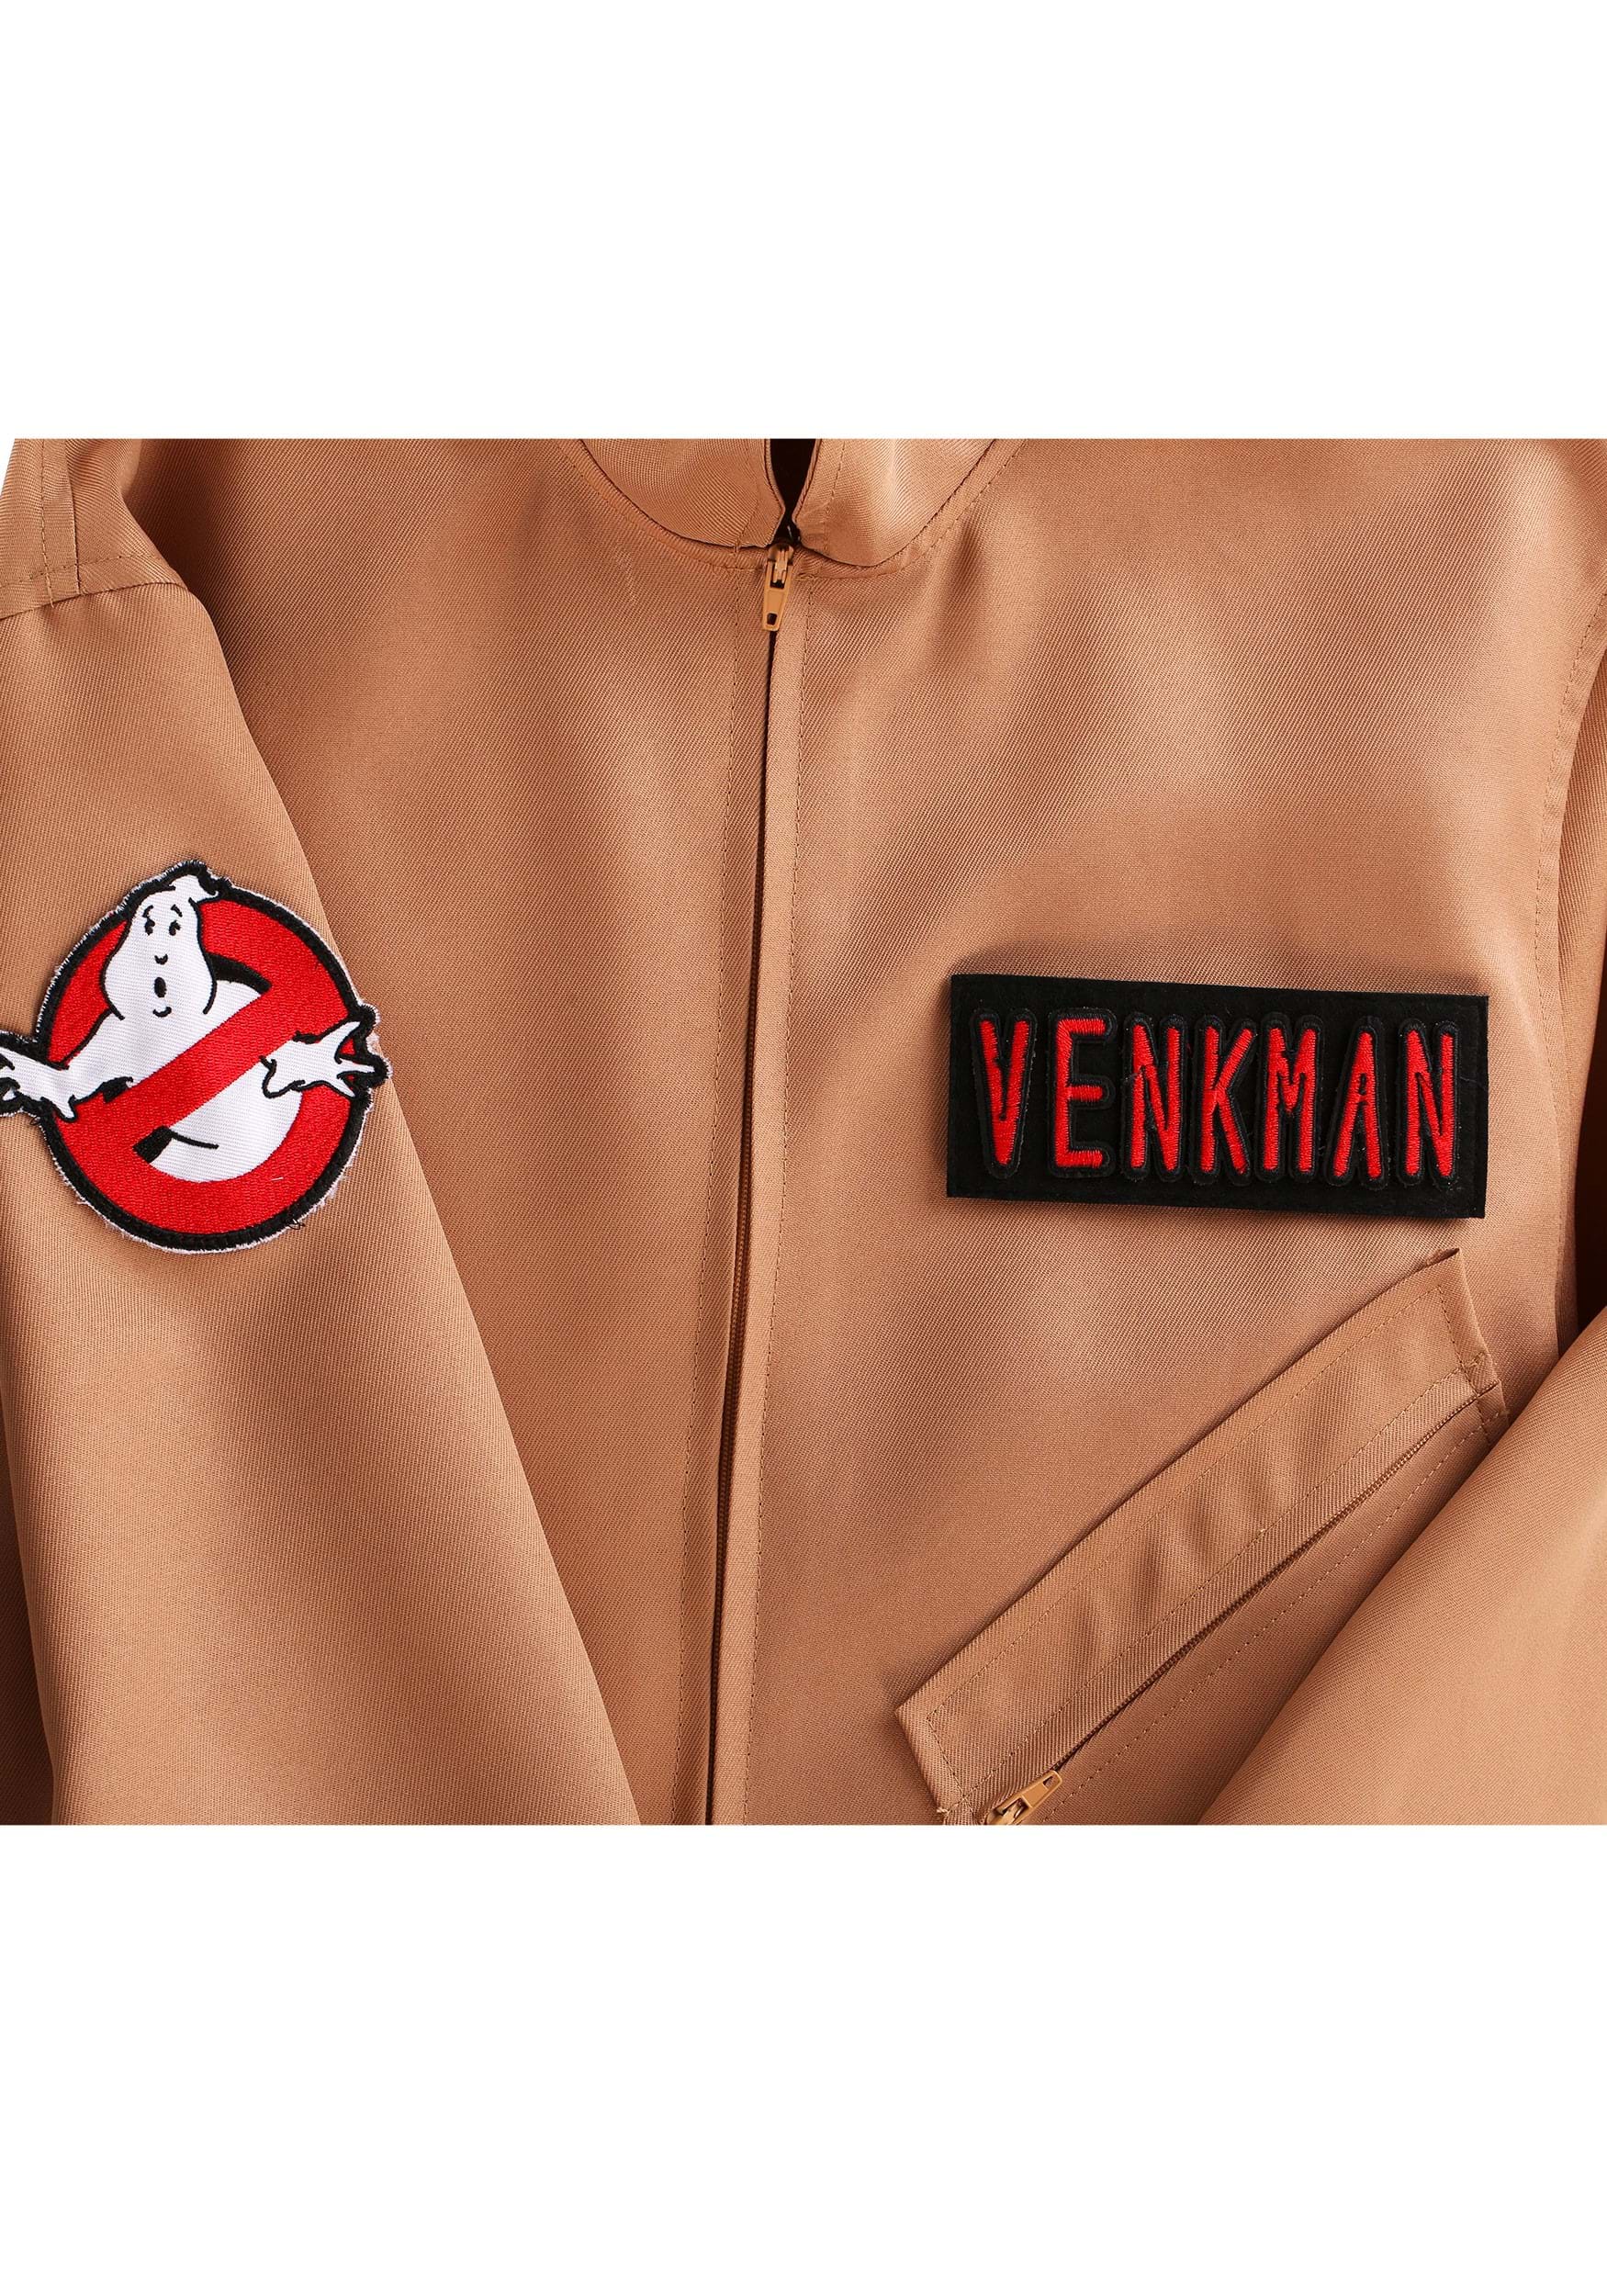 Ghostbusters Name Badge Costume Kit